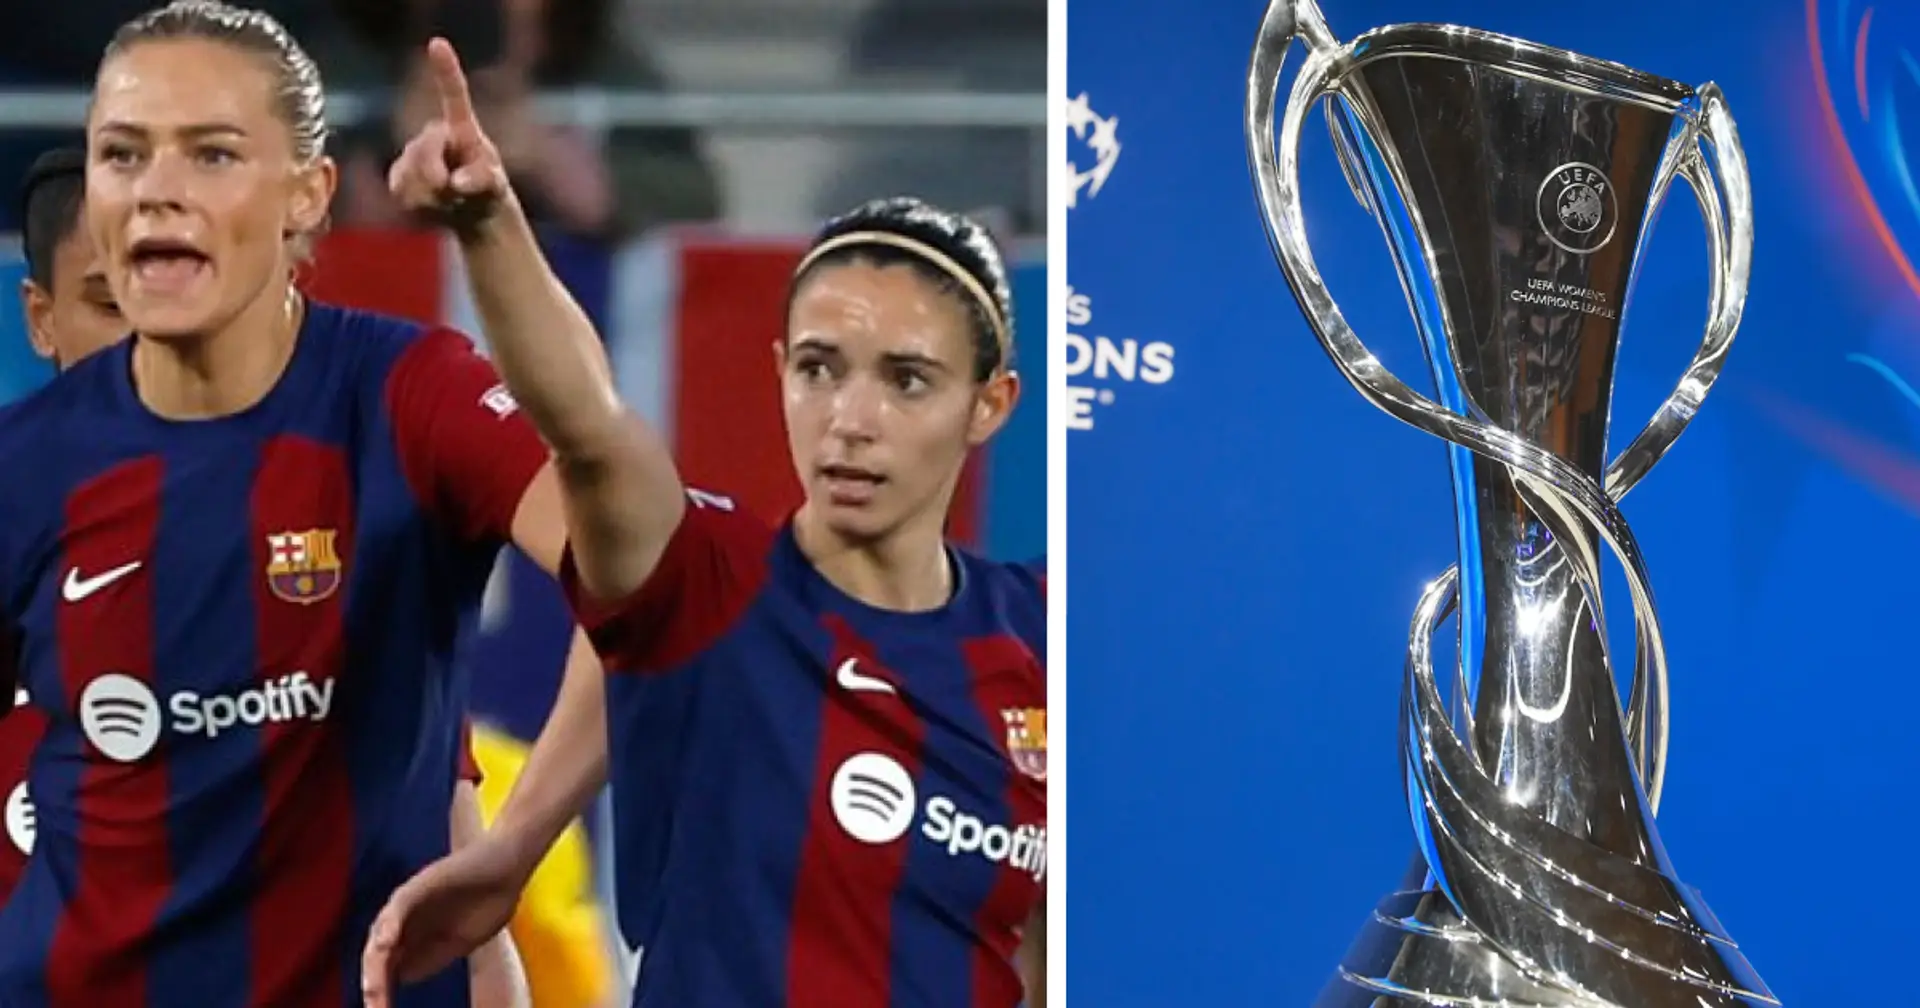 Barca Femeni qualify for Champions League semi-final, their next opponent unveiled